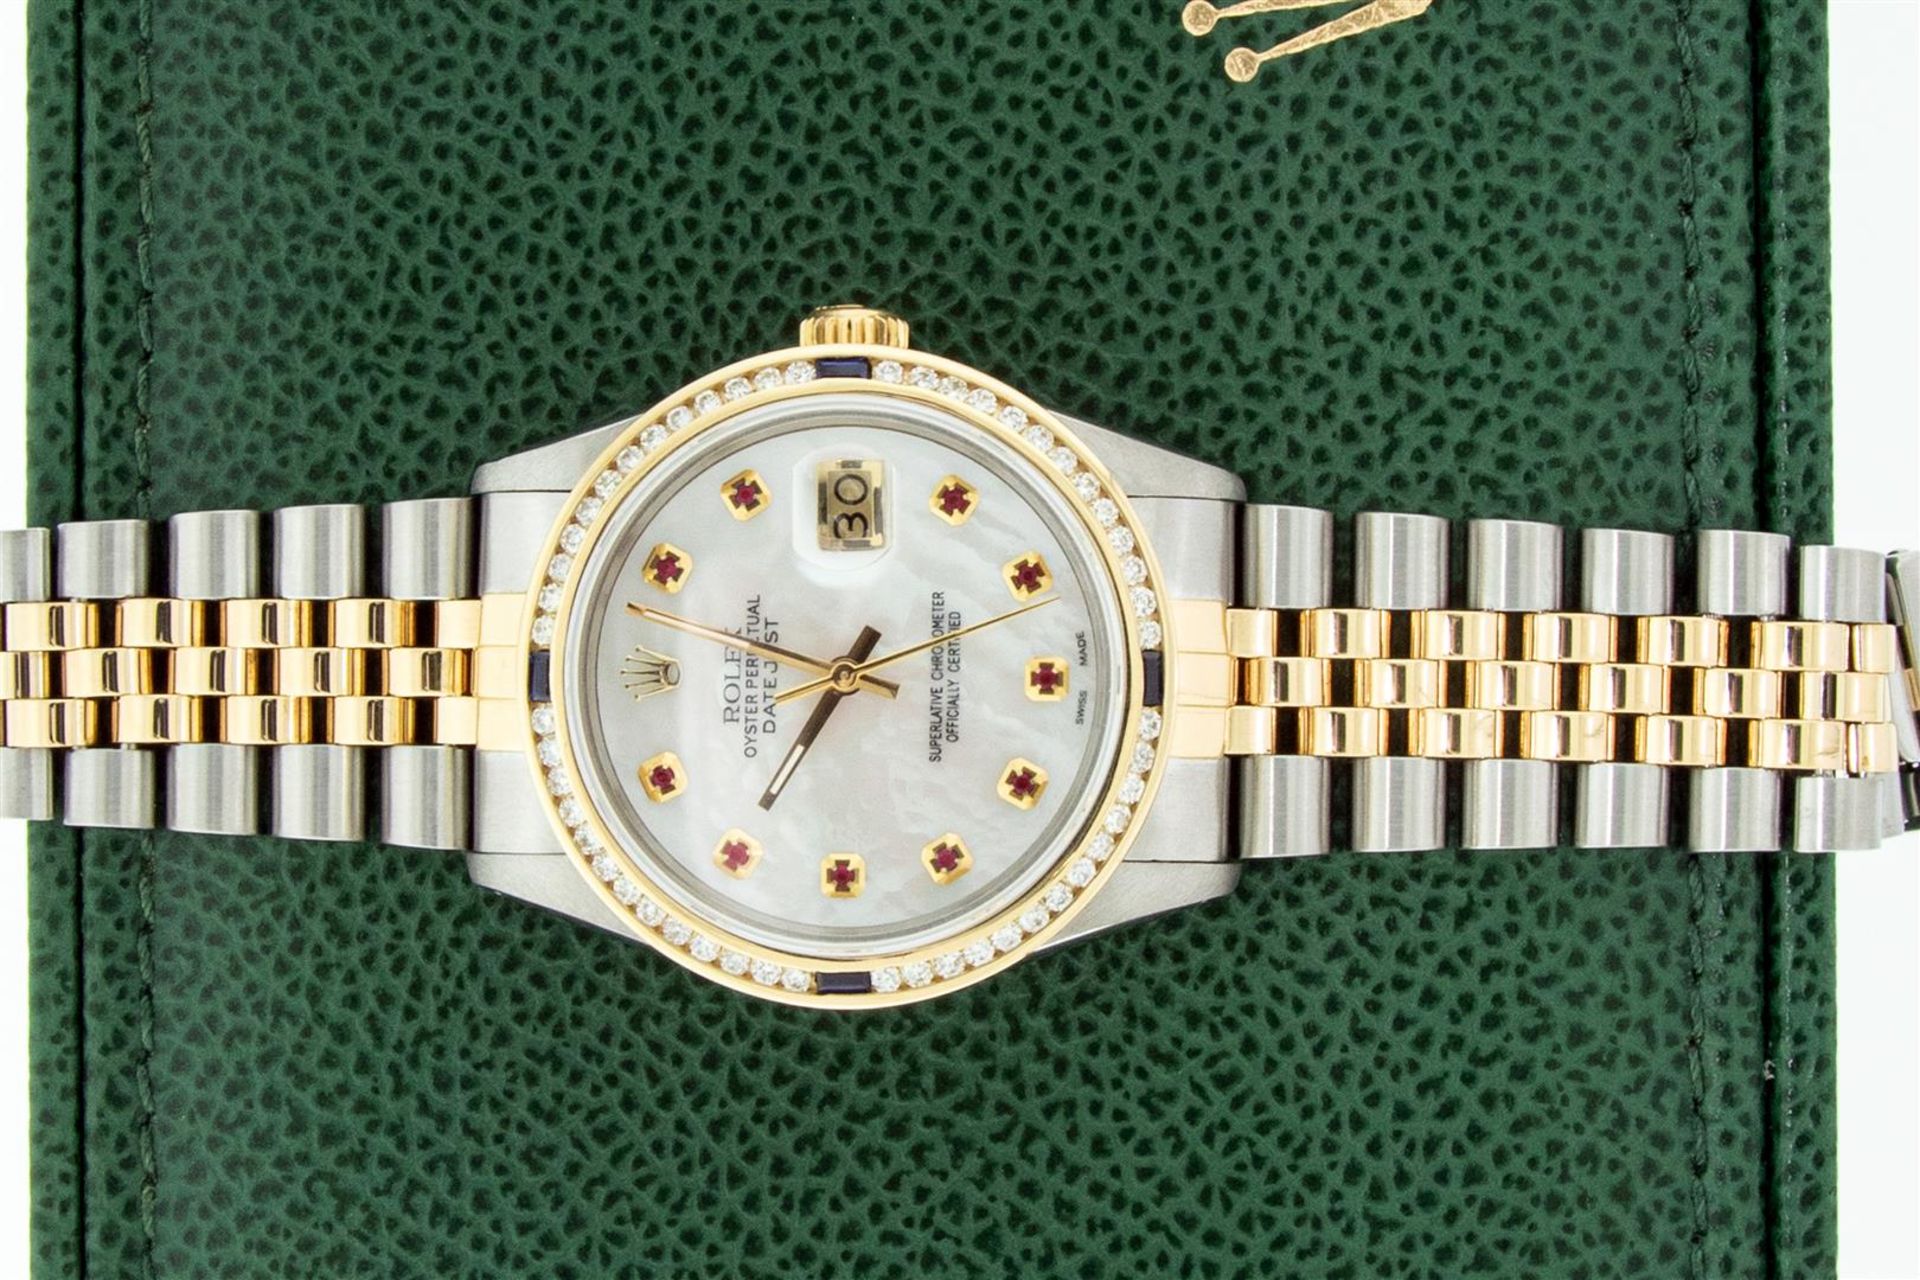 Rolex Mens 2 Tone MOP Ruby Diamond Channel Set Datejust 36MM Oyster Perpetual Wr - Image 4 of 9